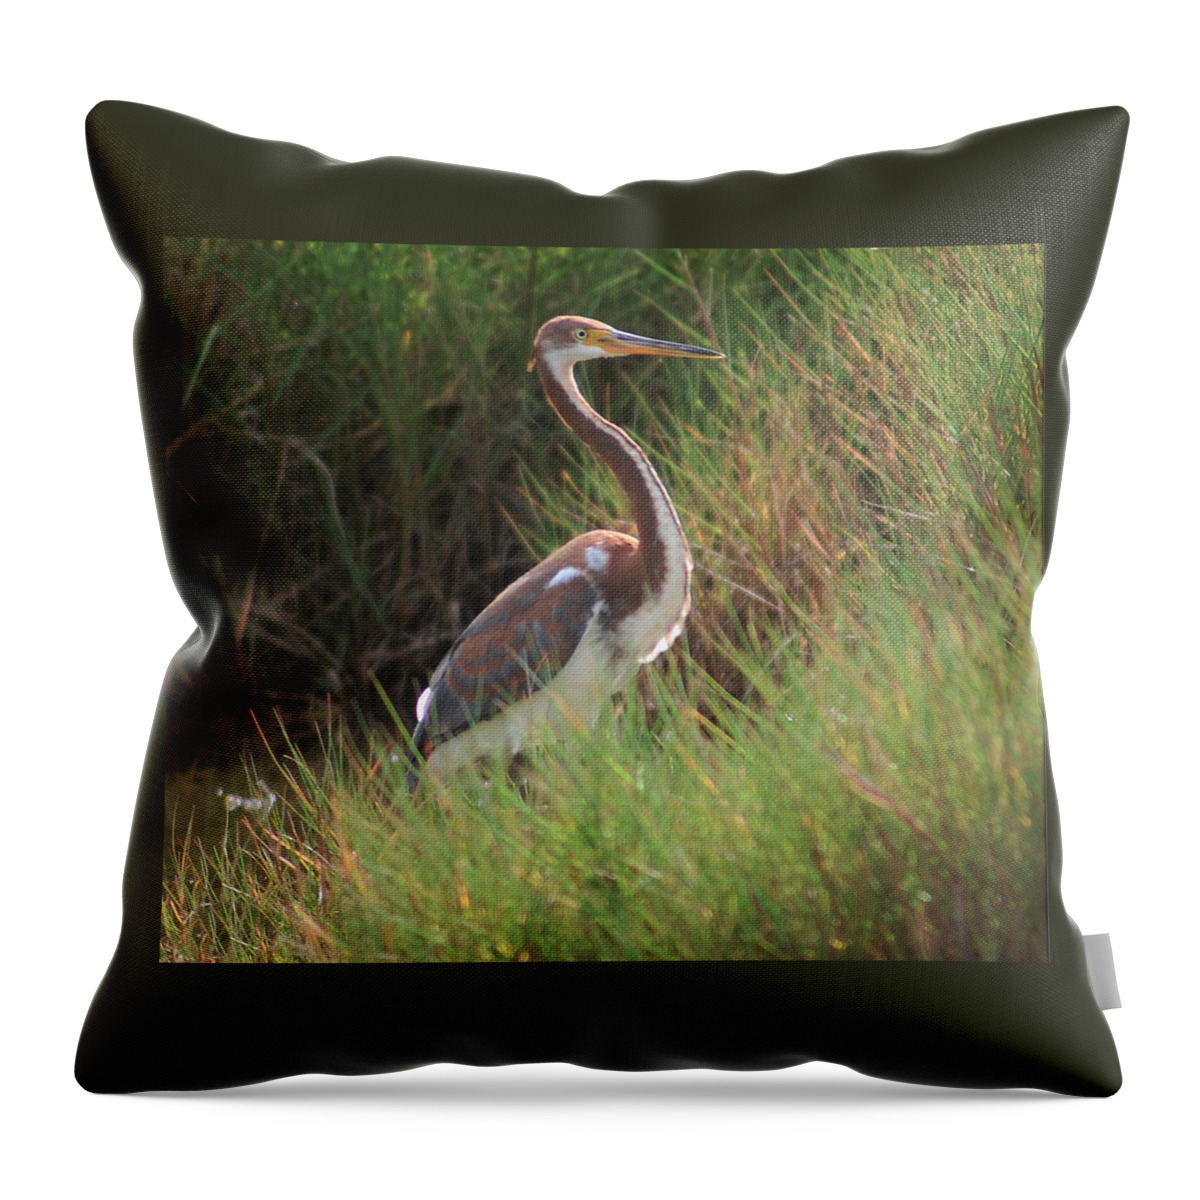 Tri-color Heron Throw Pillow featuring the photograph Tri-Color Heron by Leticia Latocki